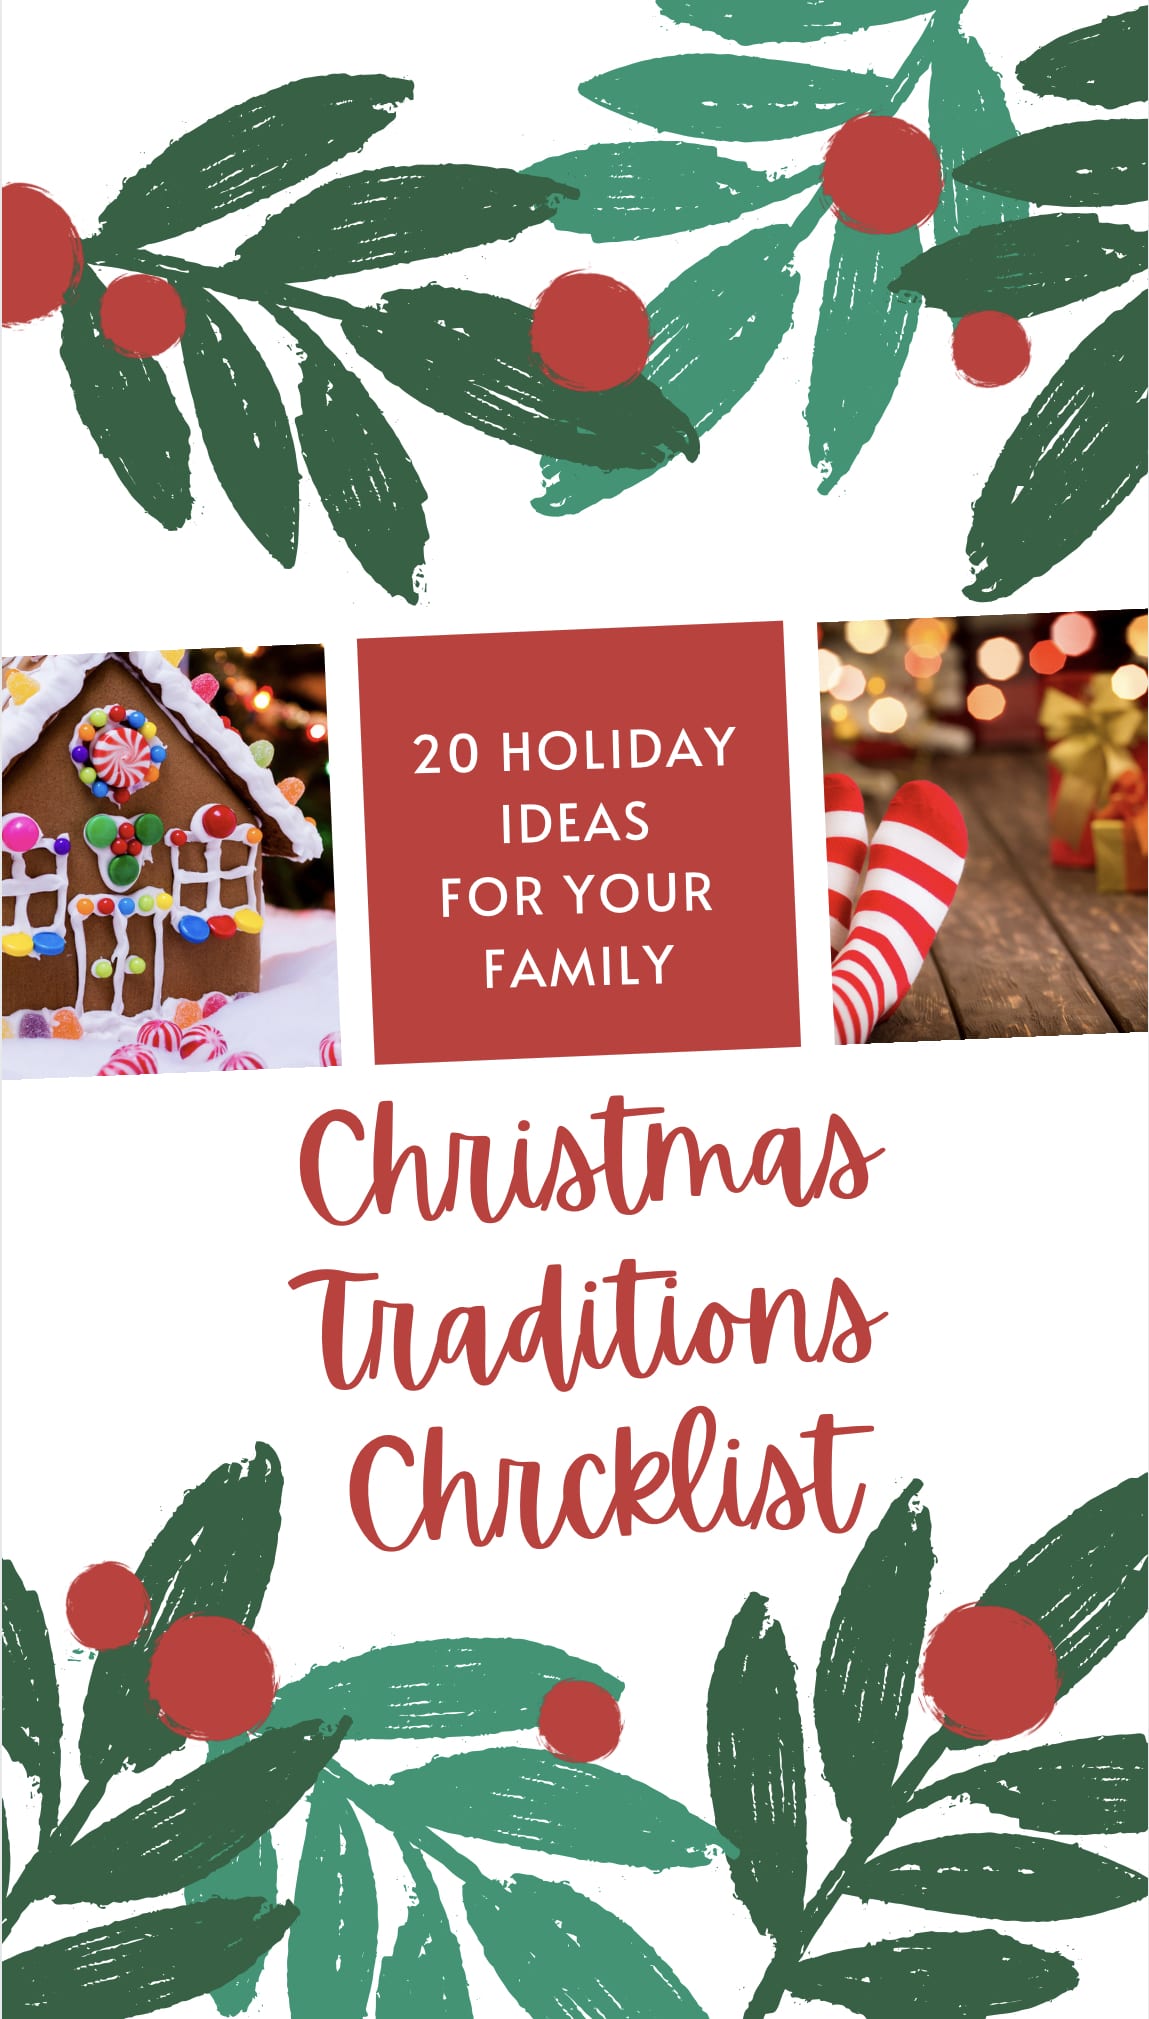 Christmas Traditions Checklist - 20 Holiday Ideas For Your Family. Fun family holiday activities to do!